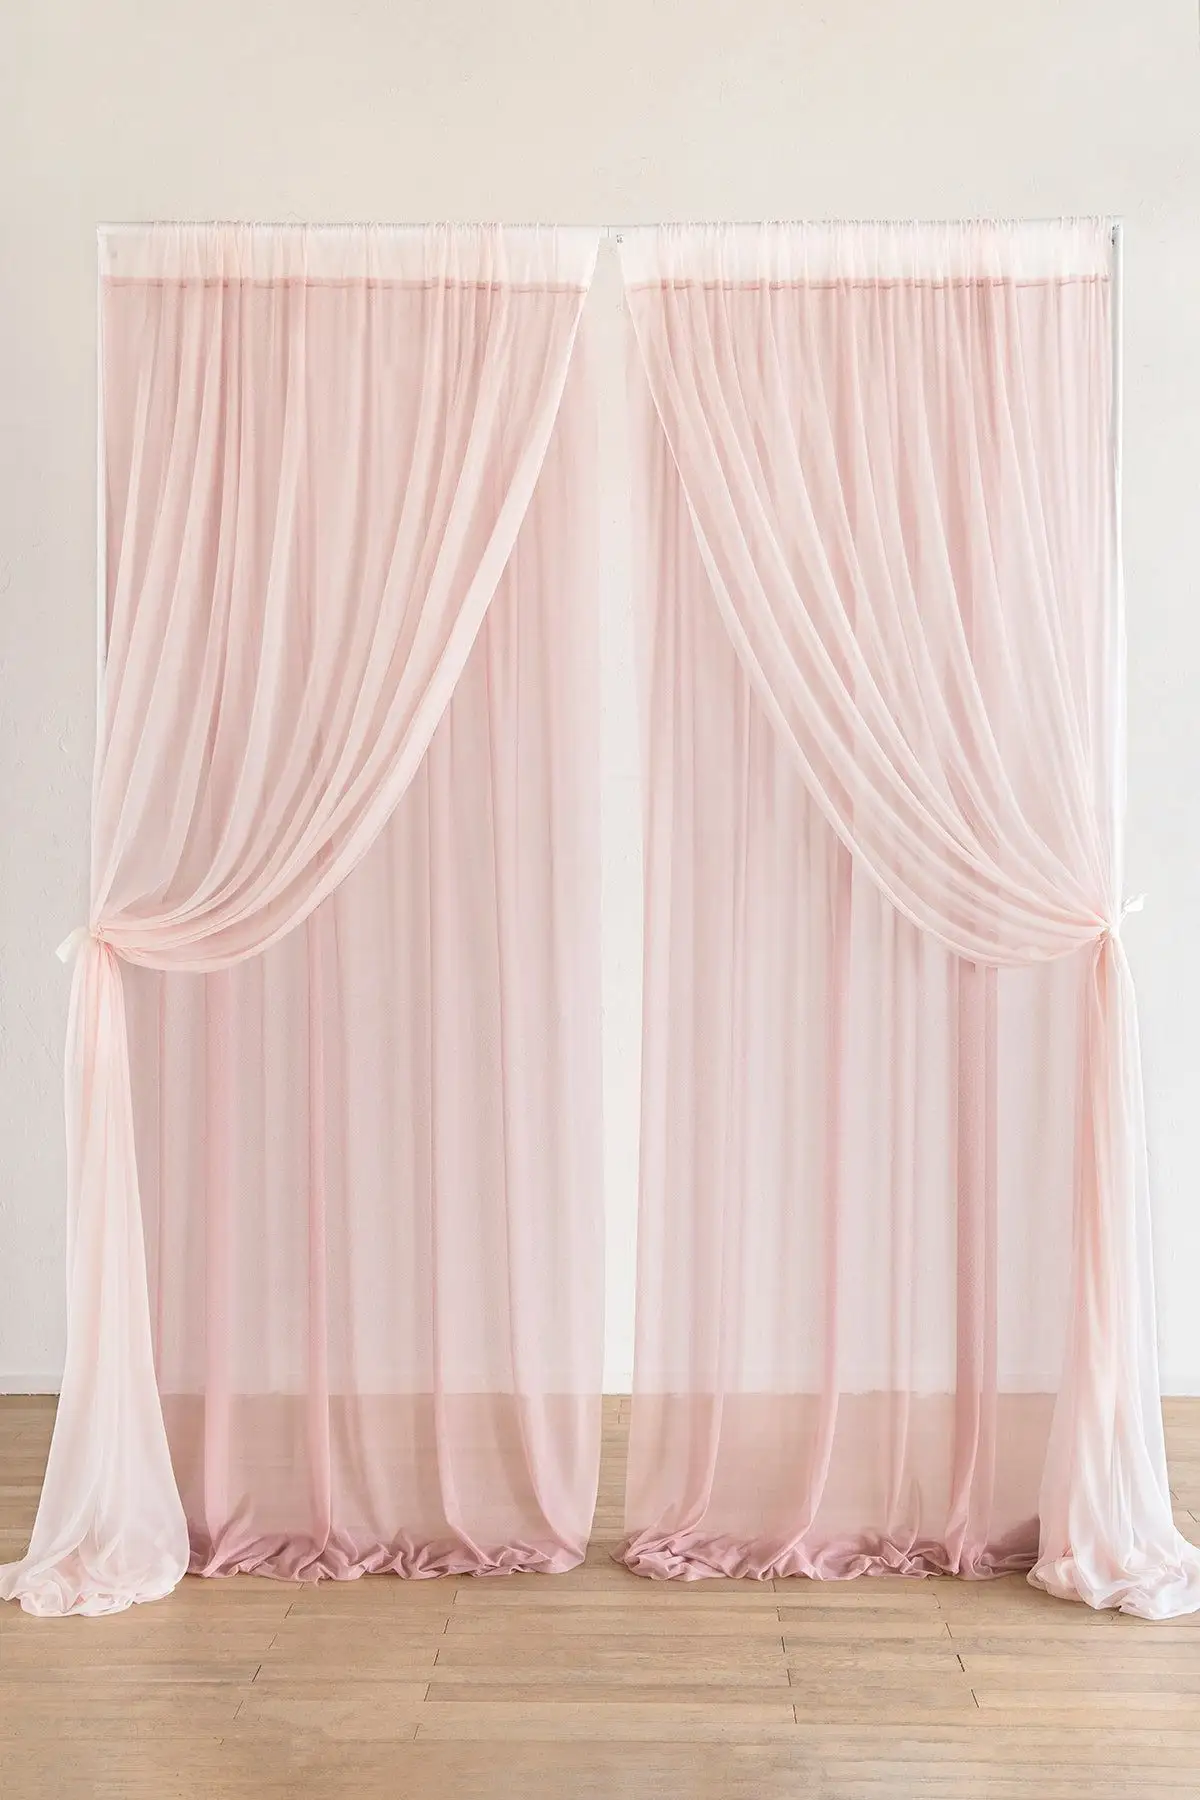 20FT x 10FT Double Layer Polyester Chiffon Pipe And Drape With Rod Pockets Drapes For Wedding Decoration